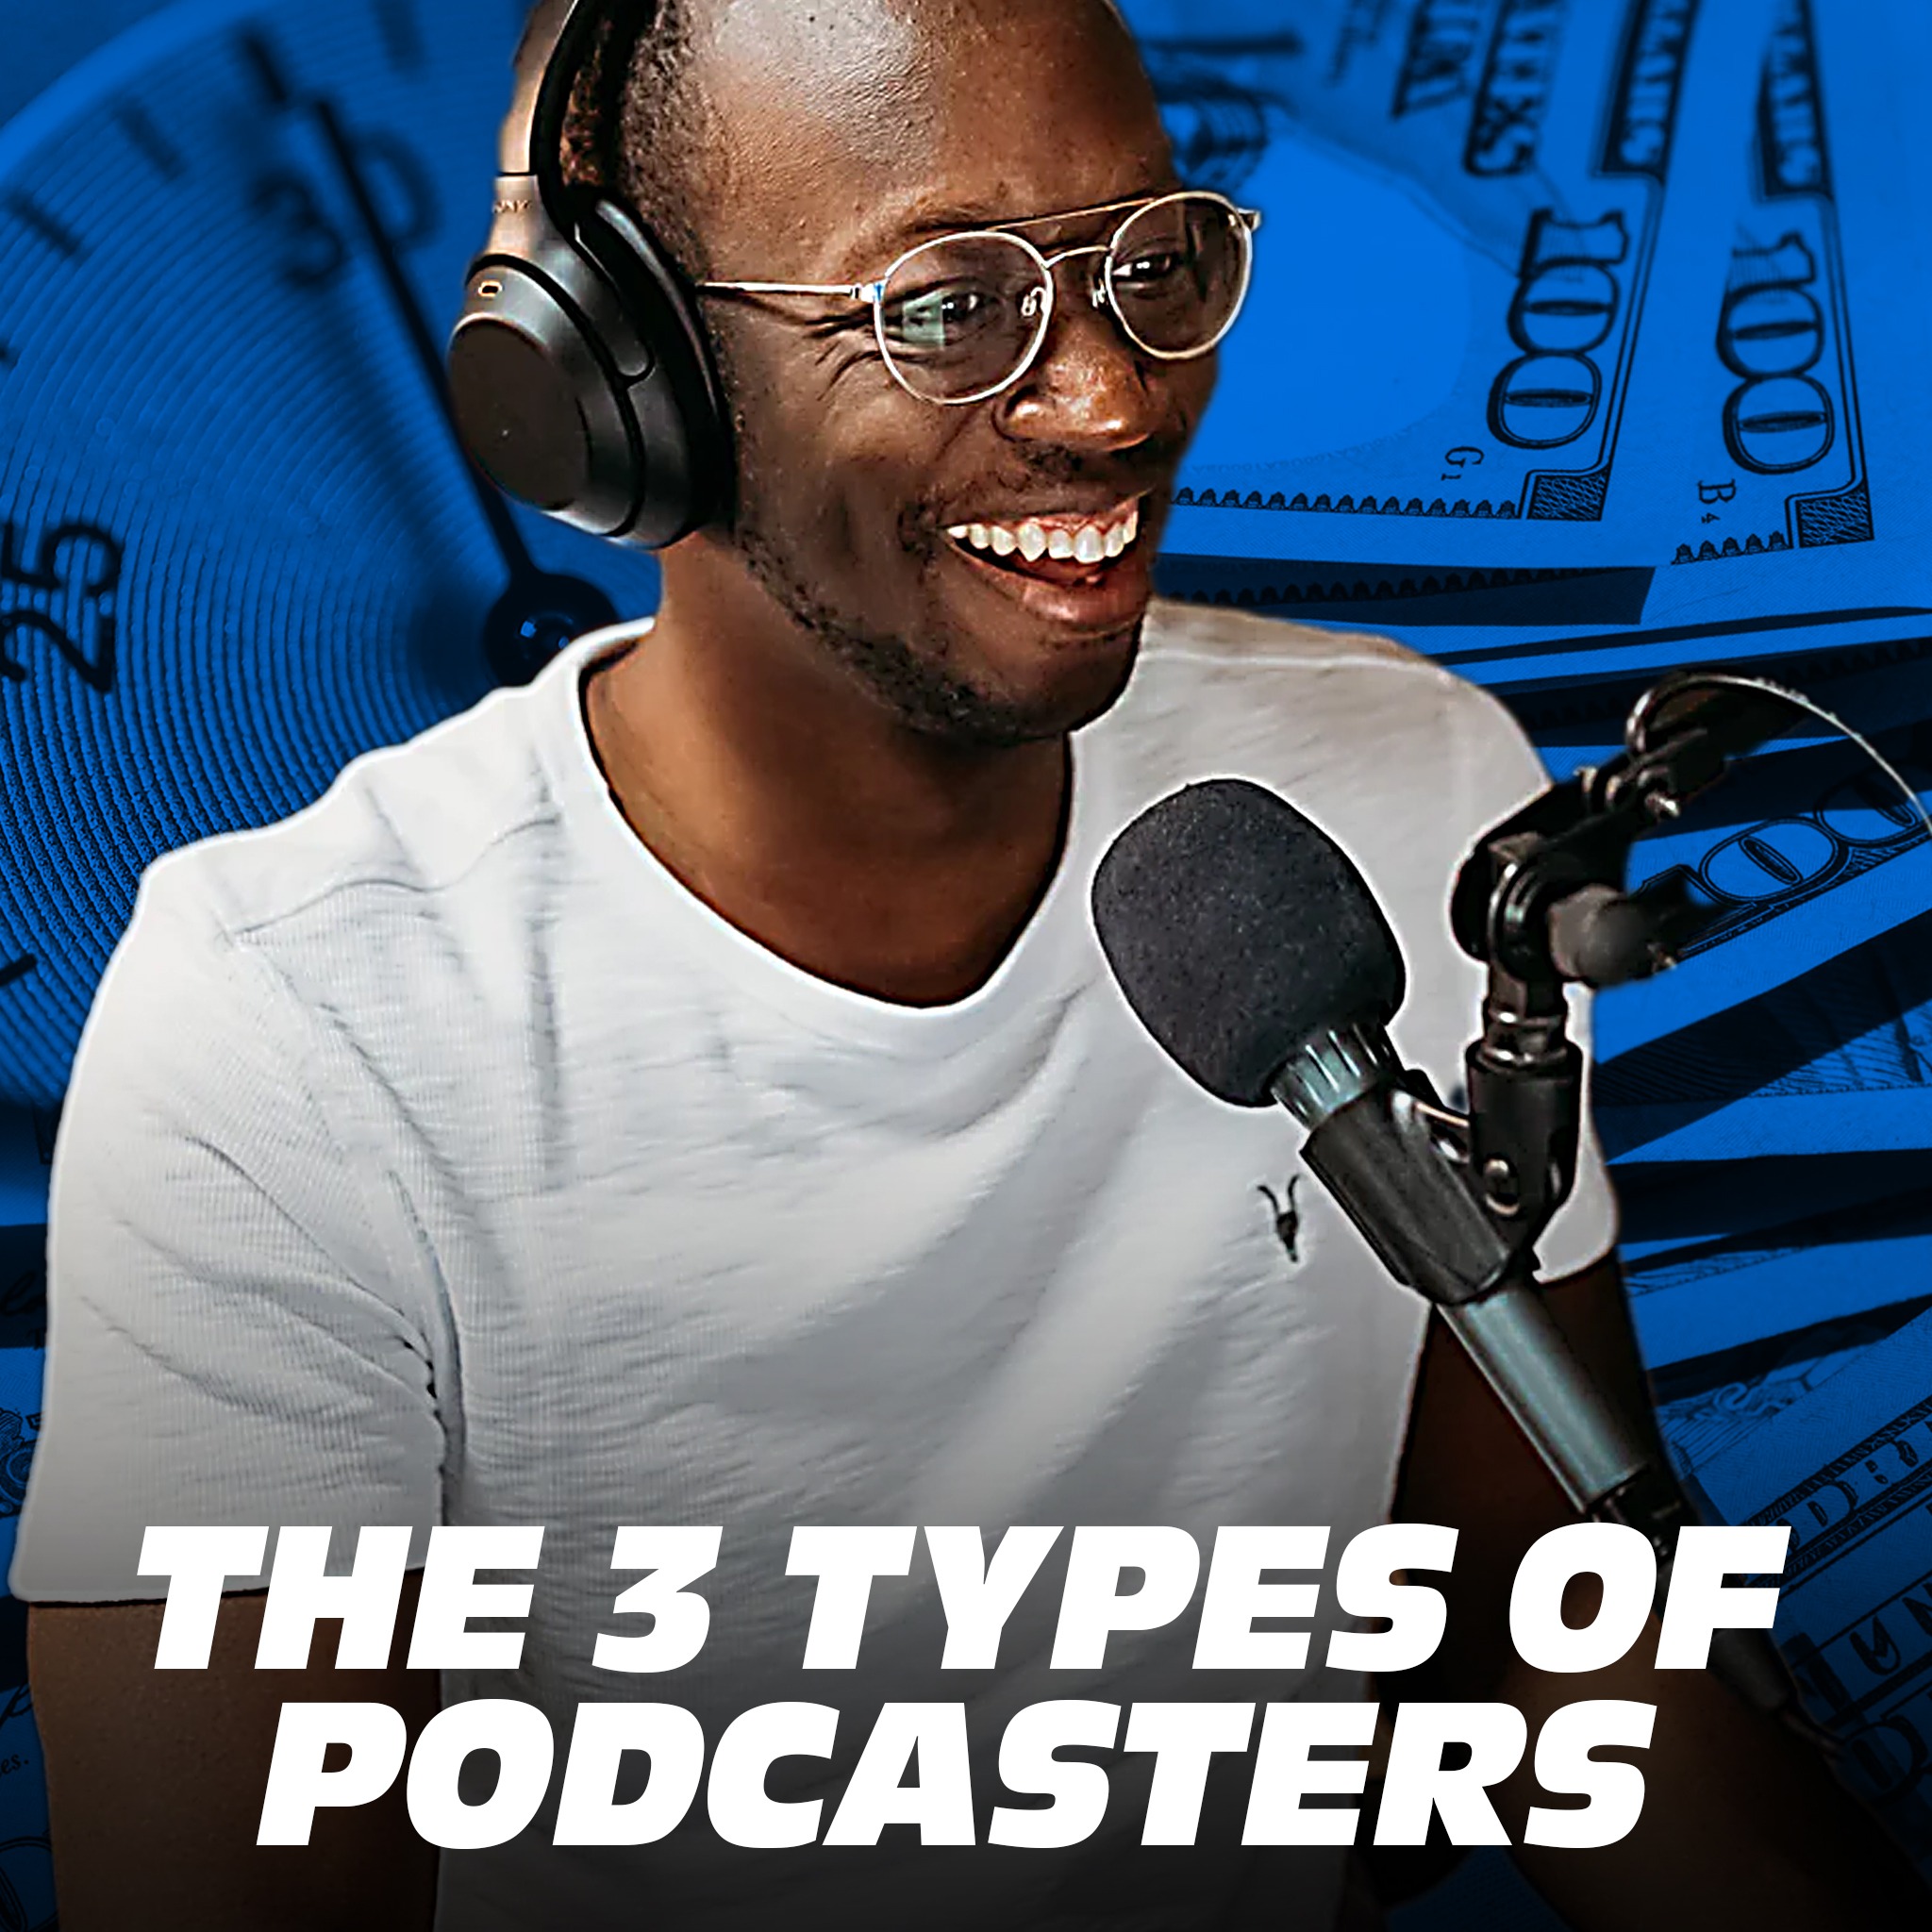 The Three Types of Podcasters